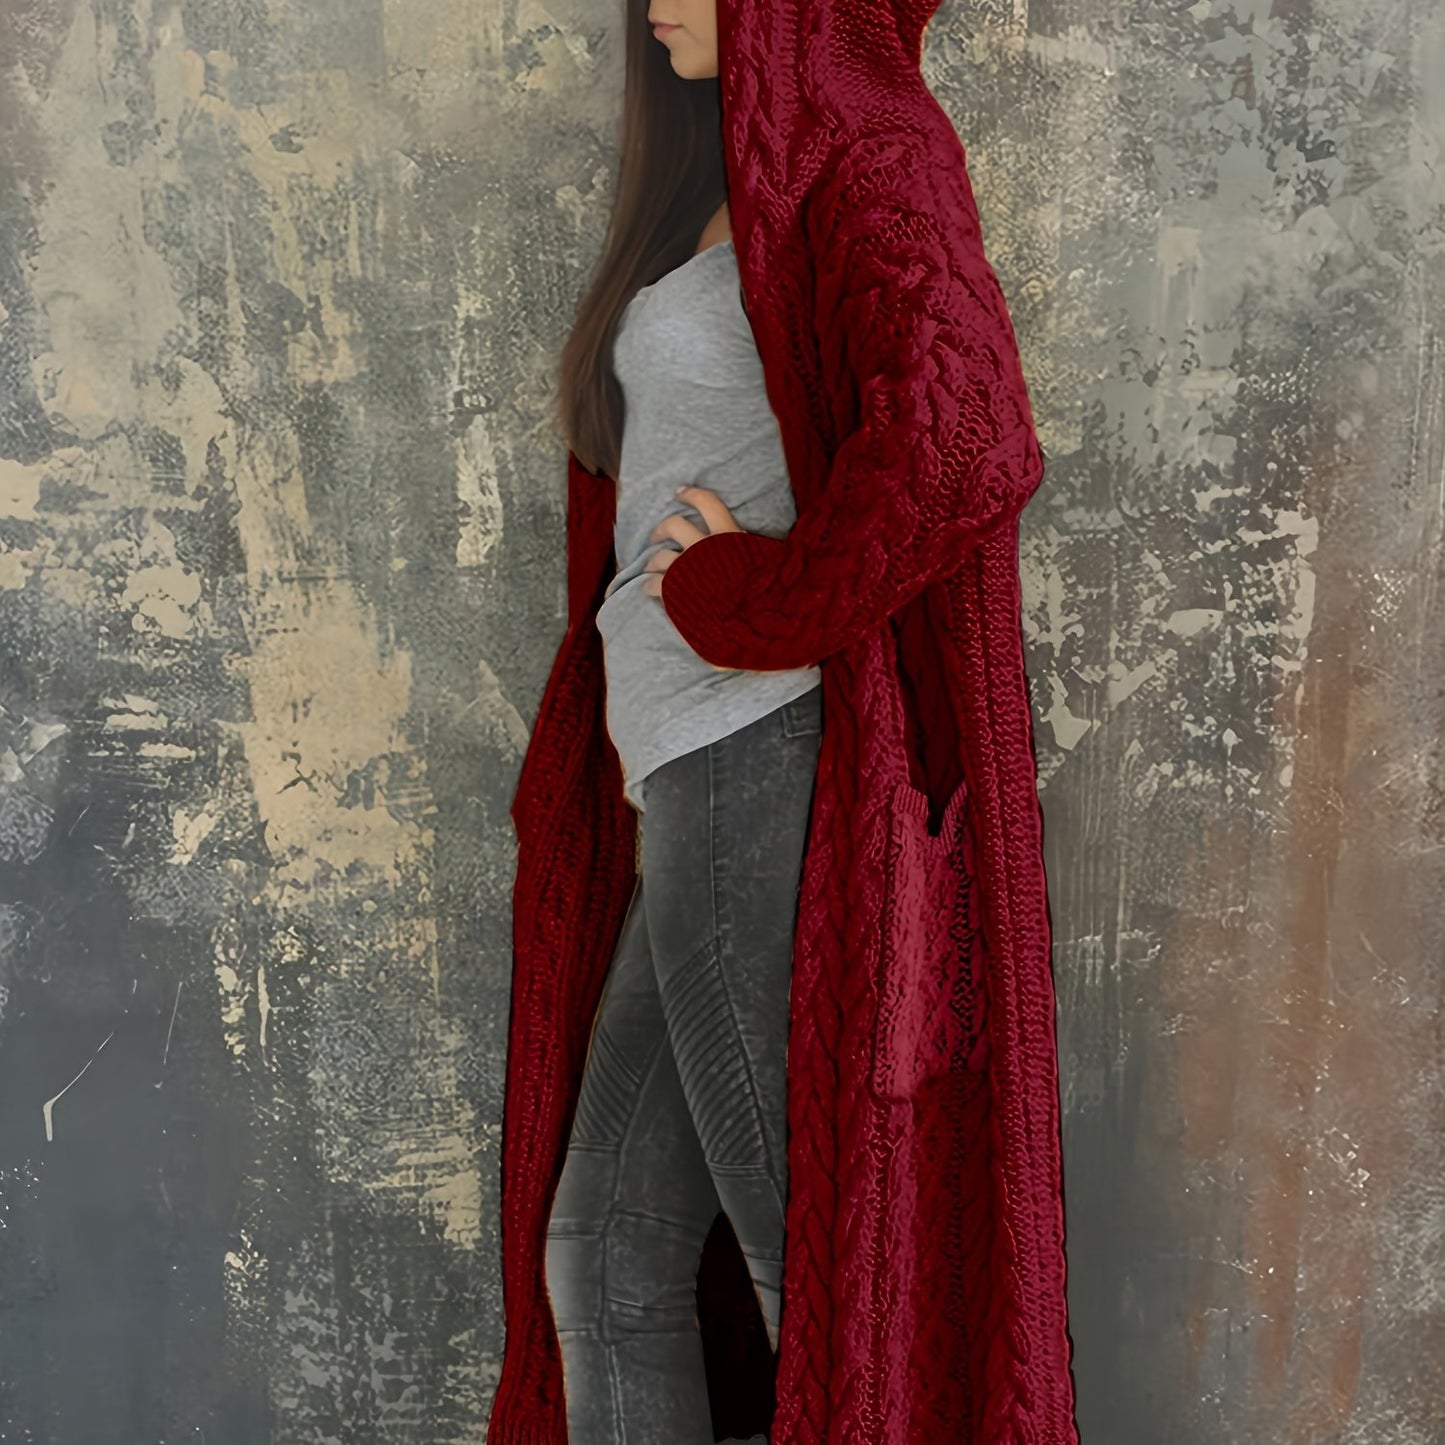 Plus Size Women's Solid Color Hooded Cardigan Coat, Casual Knitted Sweater Coat Burgundy